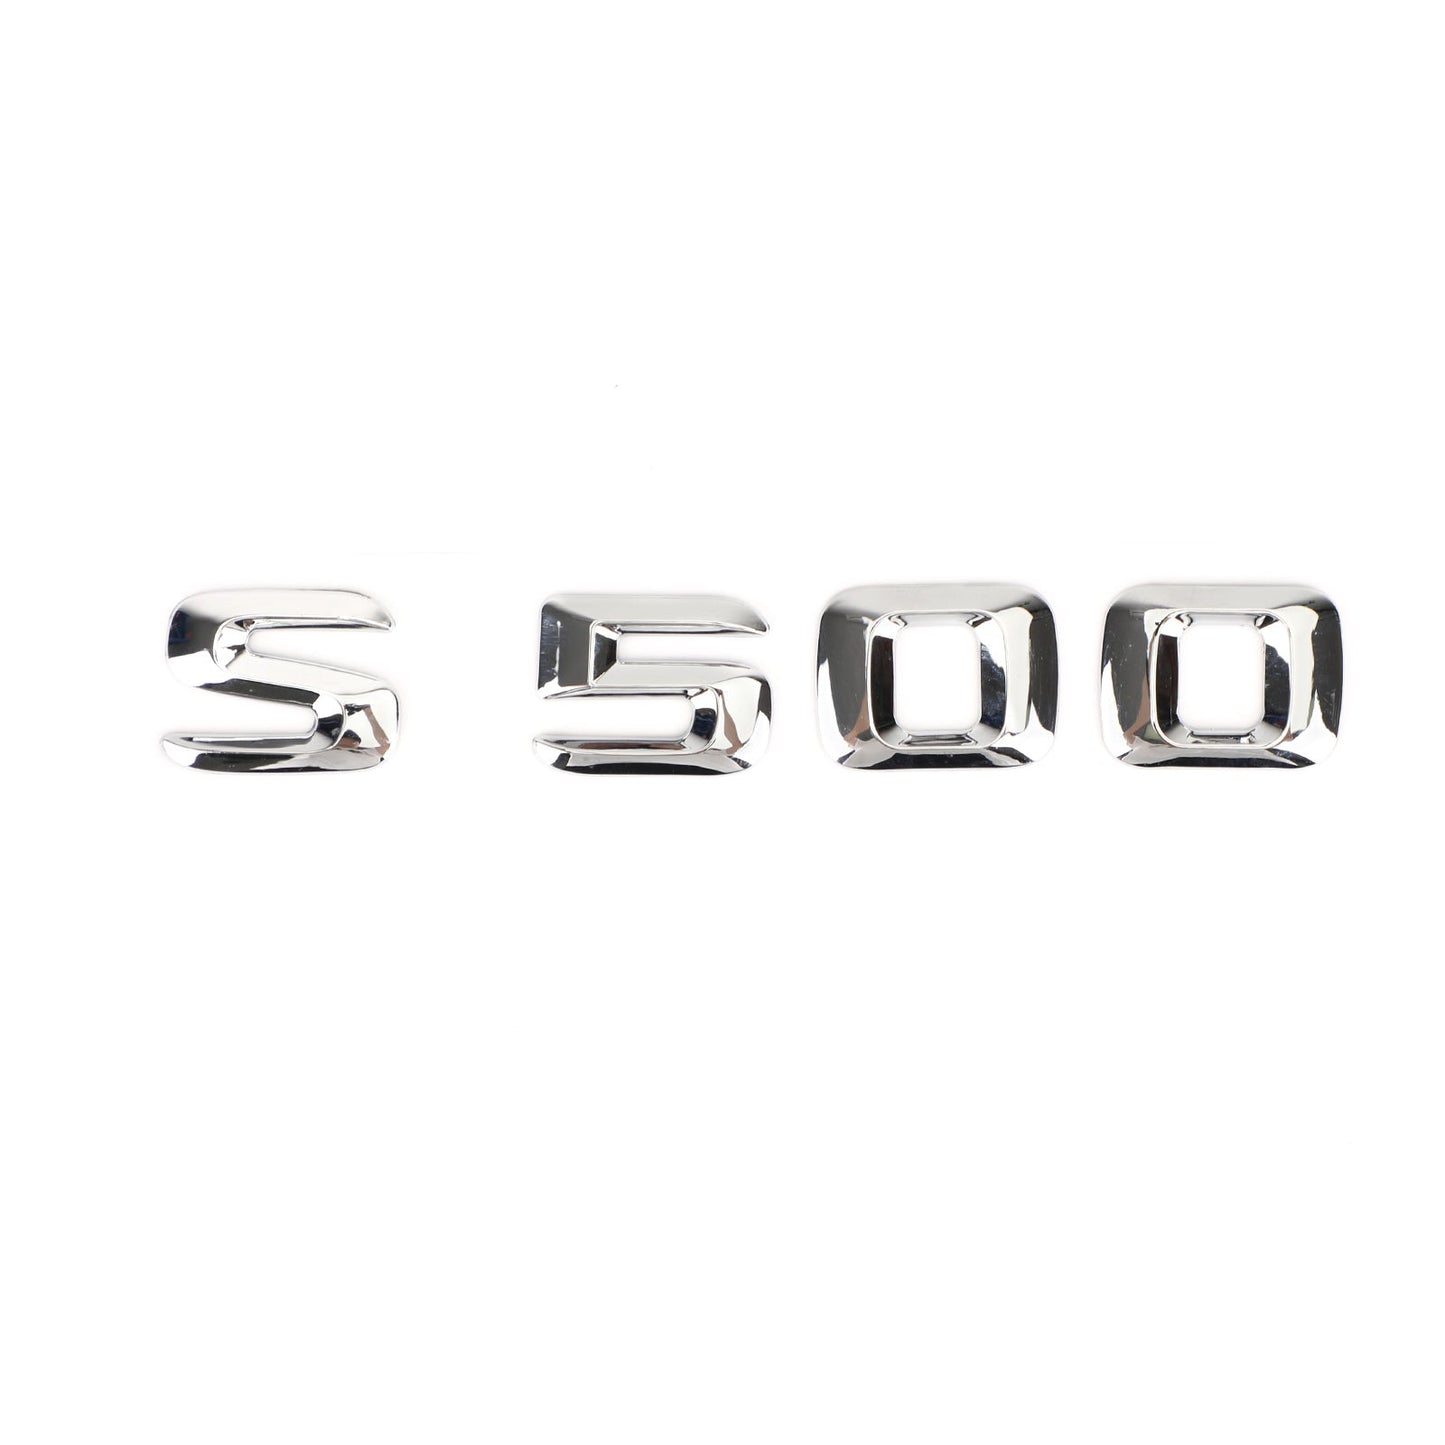 Rear Trunk Emblem Badge Nameplate Decal Letters Numbers Fit Mercedes S500 Chrome